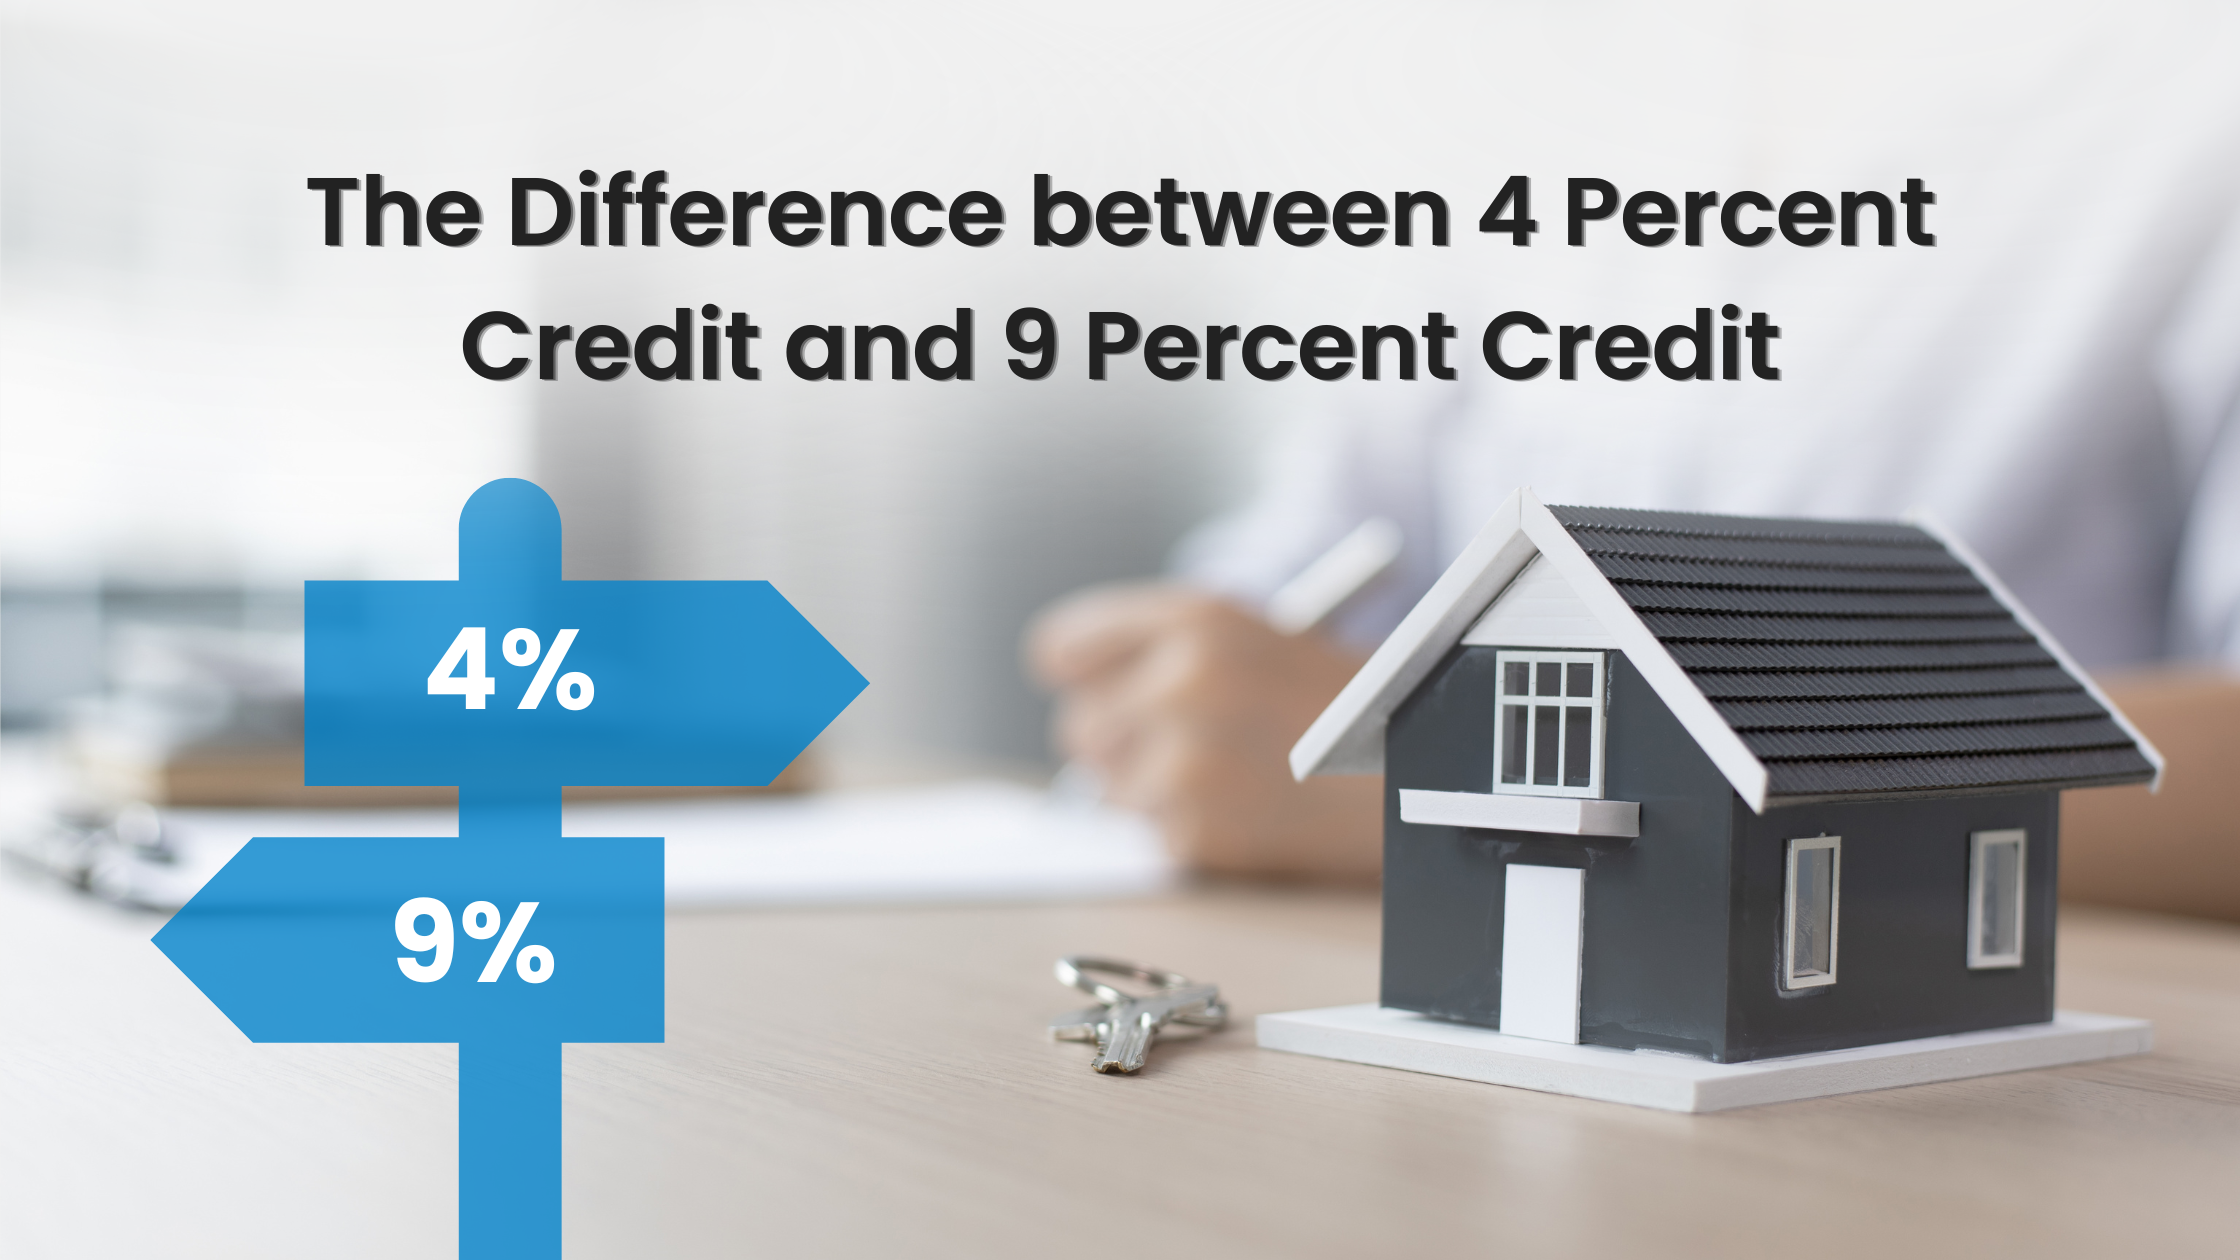 The Difference between 4 Percent Credit and 9 Percent Credit